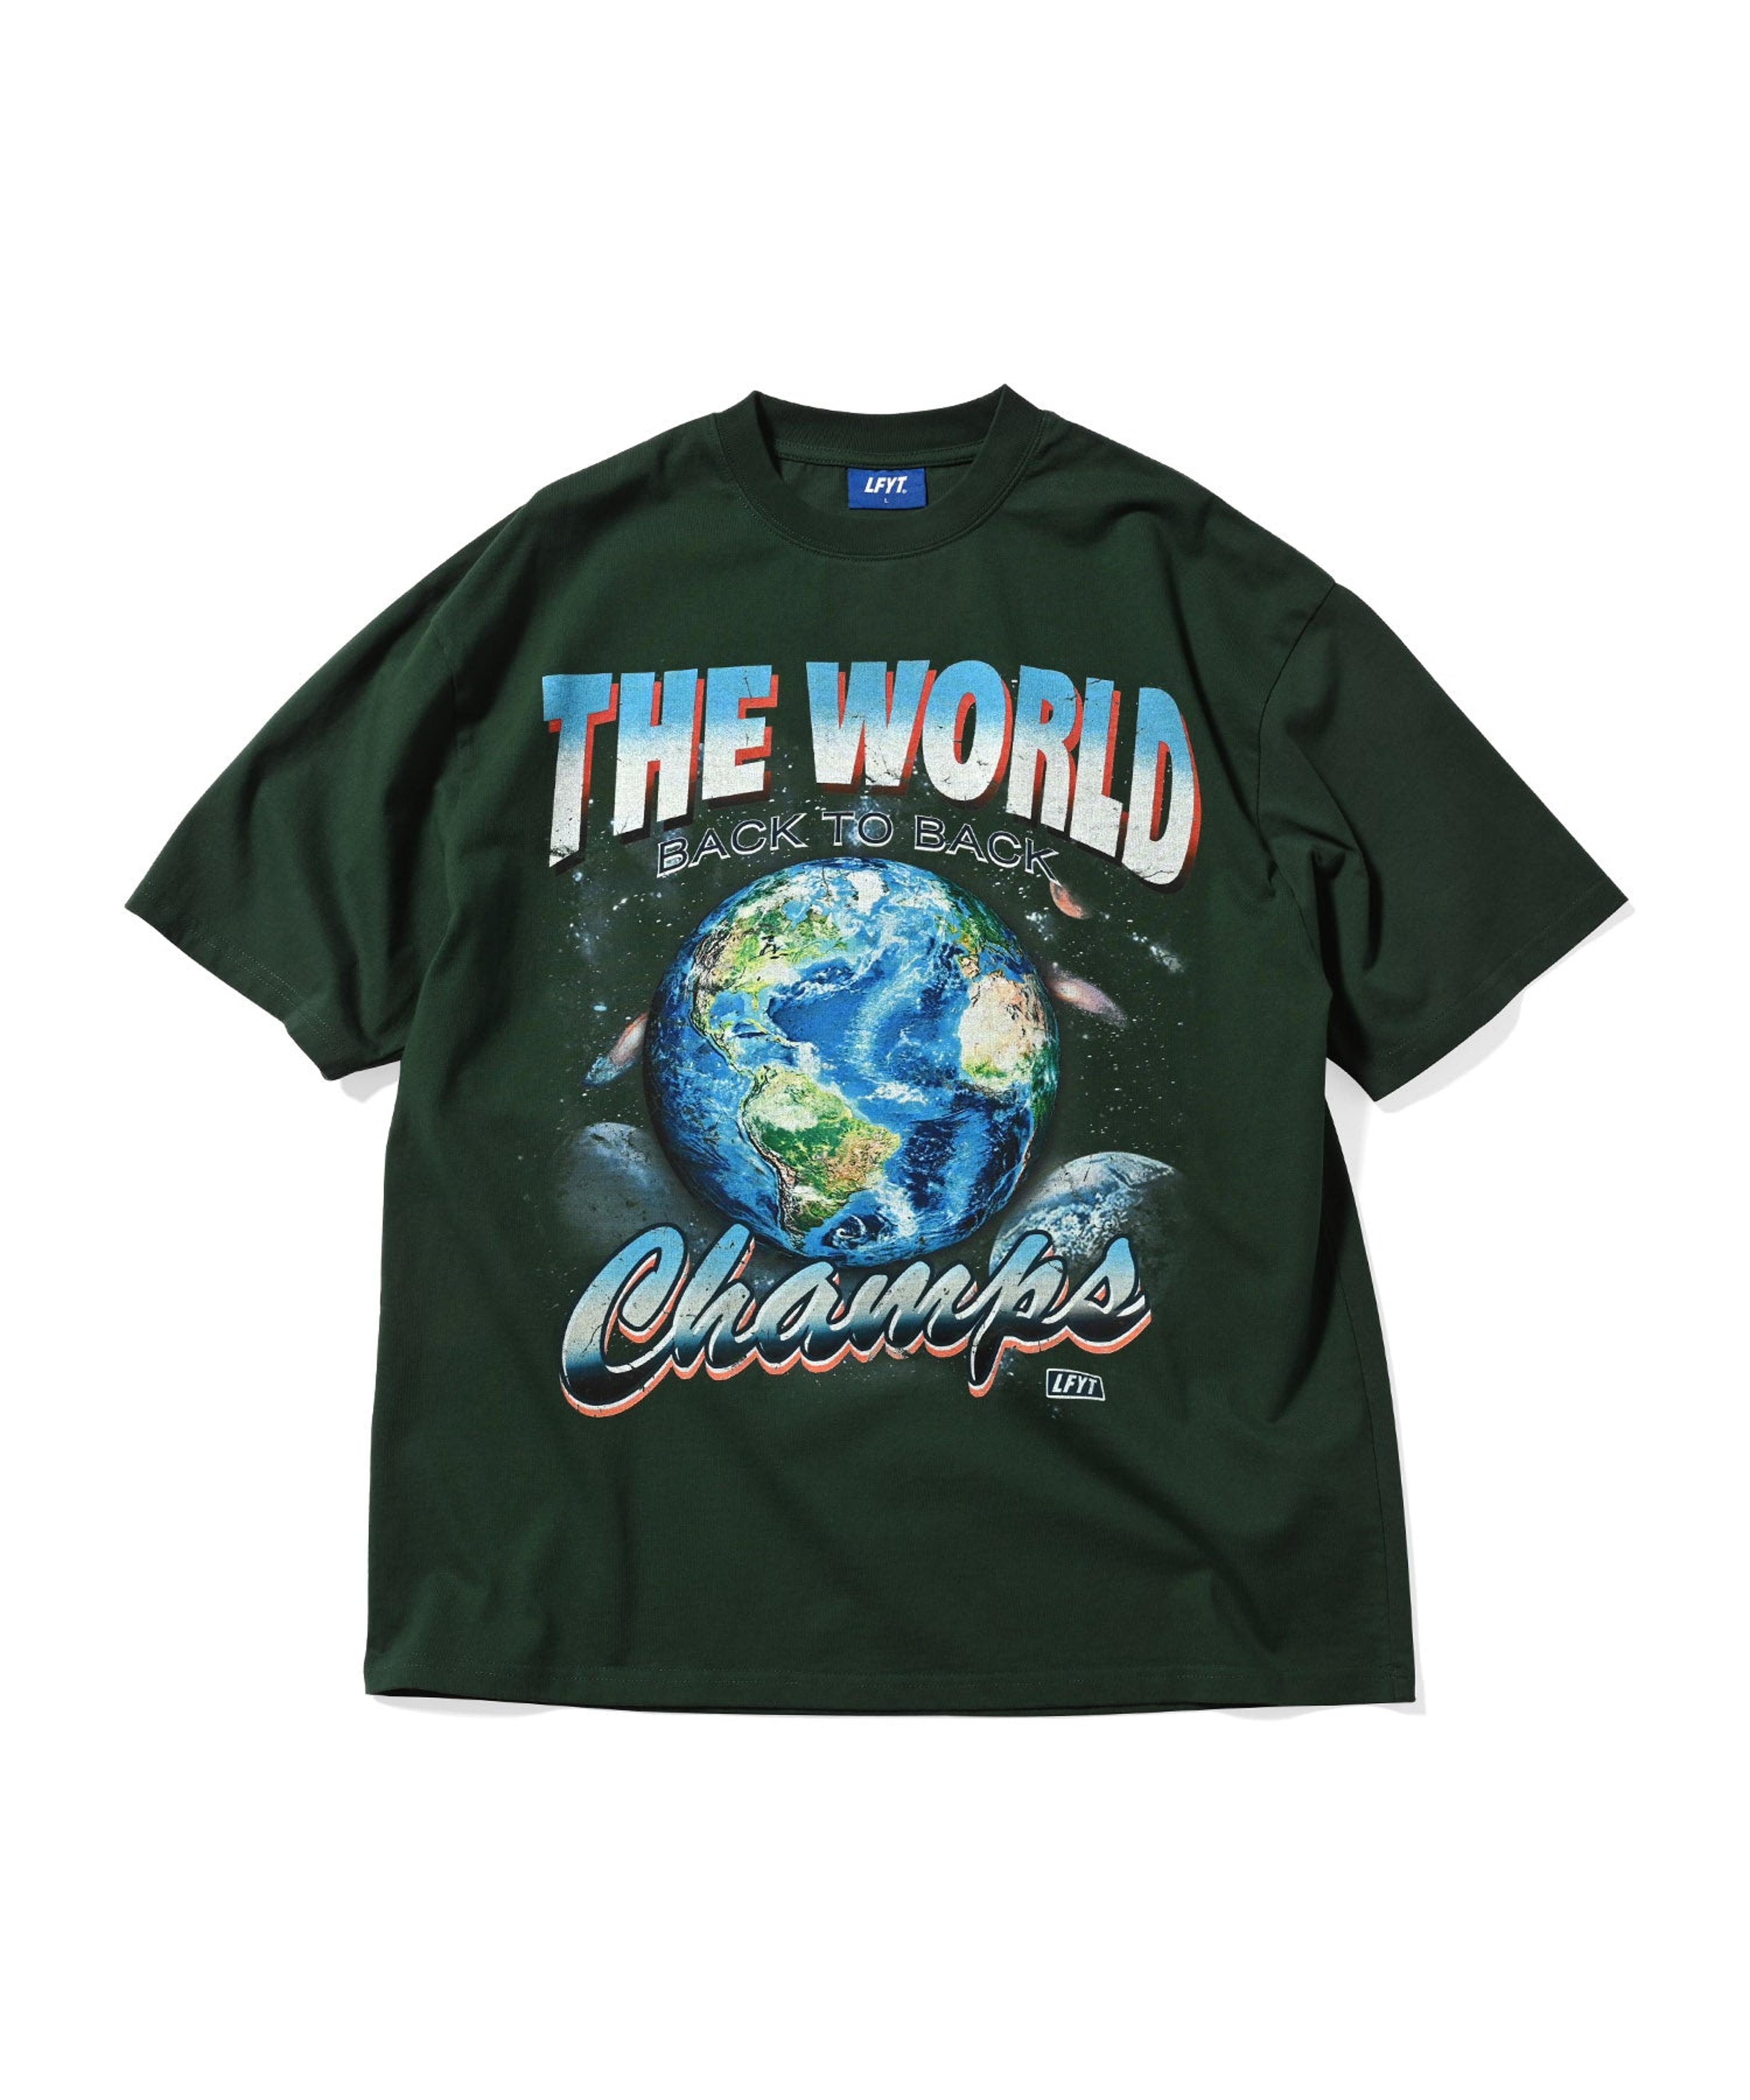 Alternate View 5 of LFYT - WORLD CHAMPS TEE TYPE-9 - VINTAGE EDITION LS240112